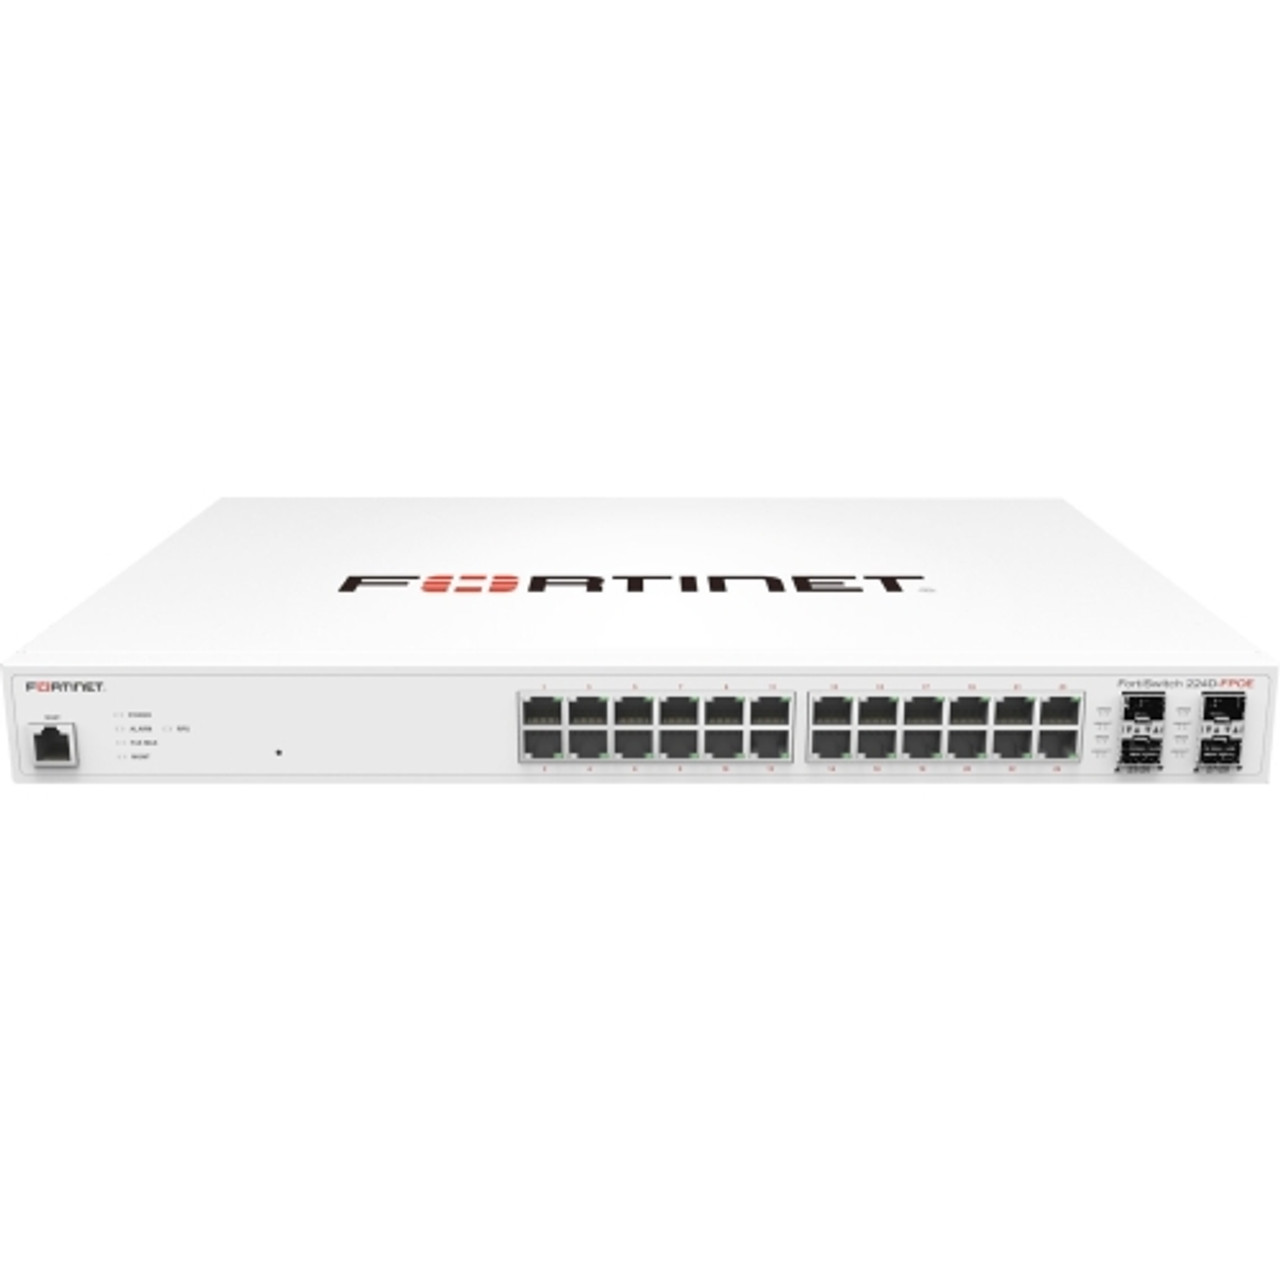 FS-224D-FPOE Fortinet Layer 2 Poe+ Switch (Refurbished)